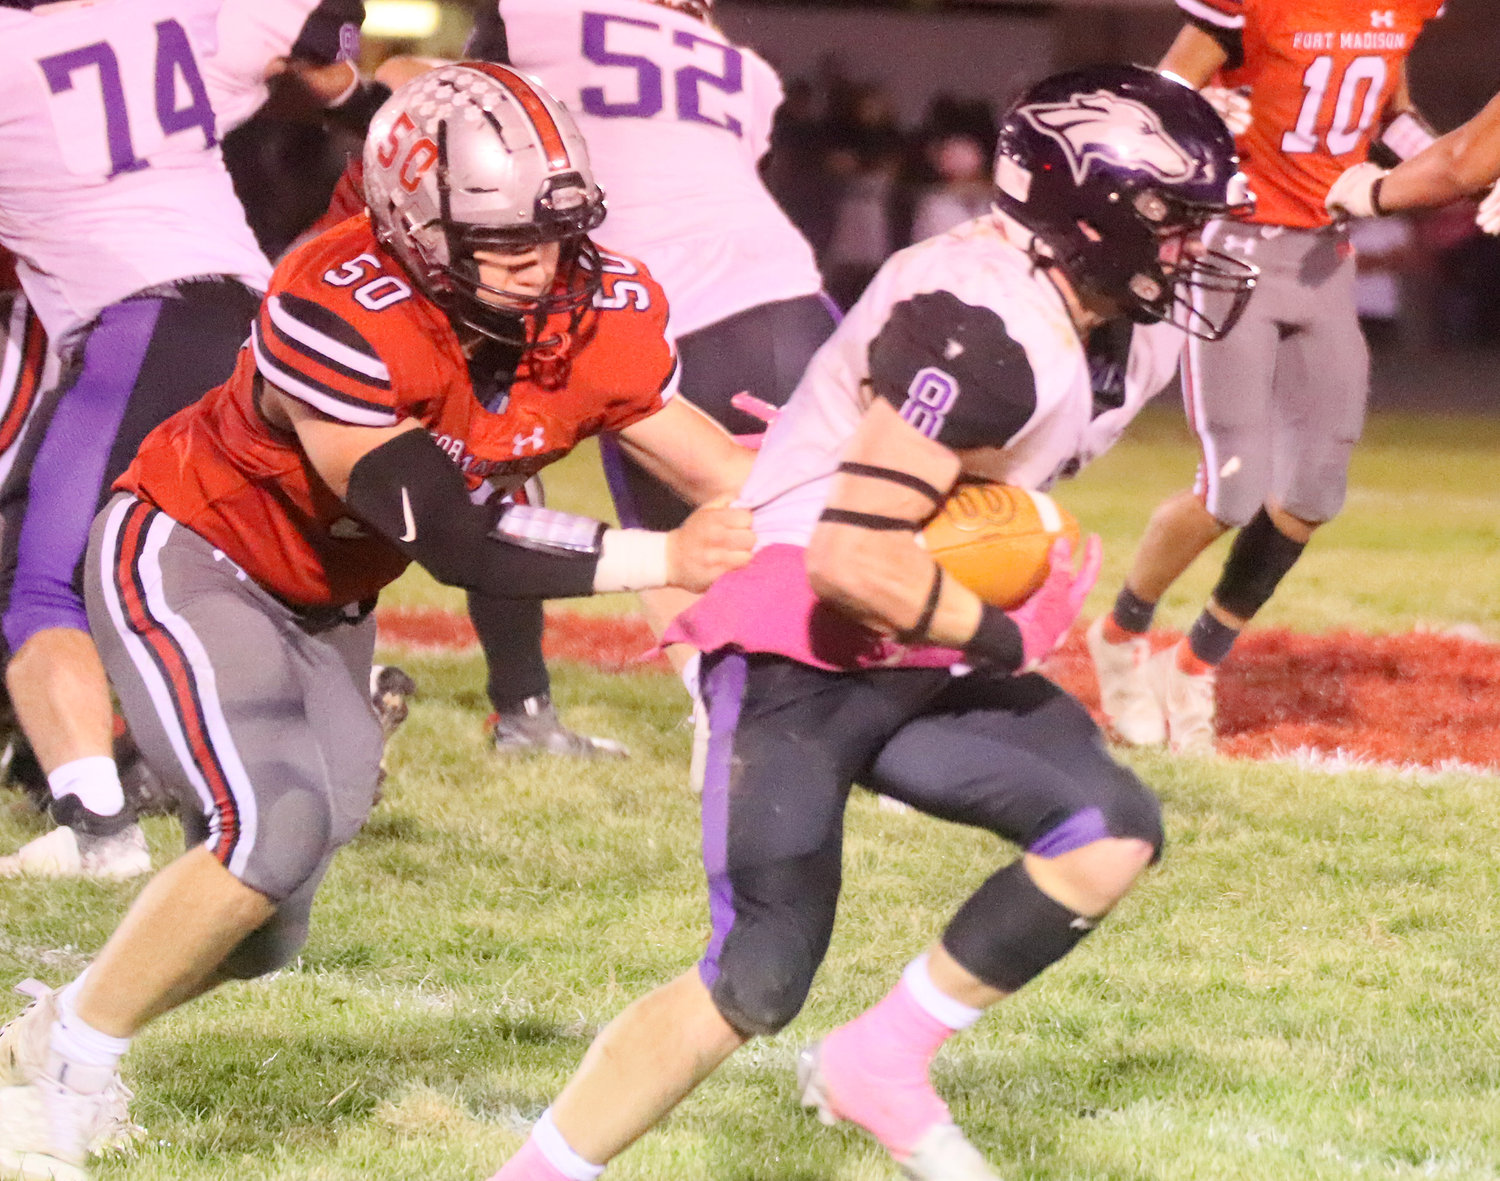 Ike Thacher pulls down Caden Schisel in the backfield for a loss of yardage Friday night in Fort Madison.